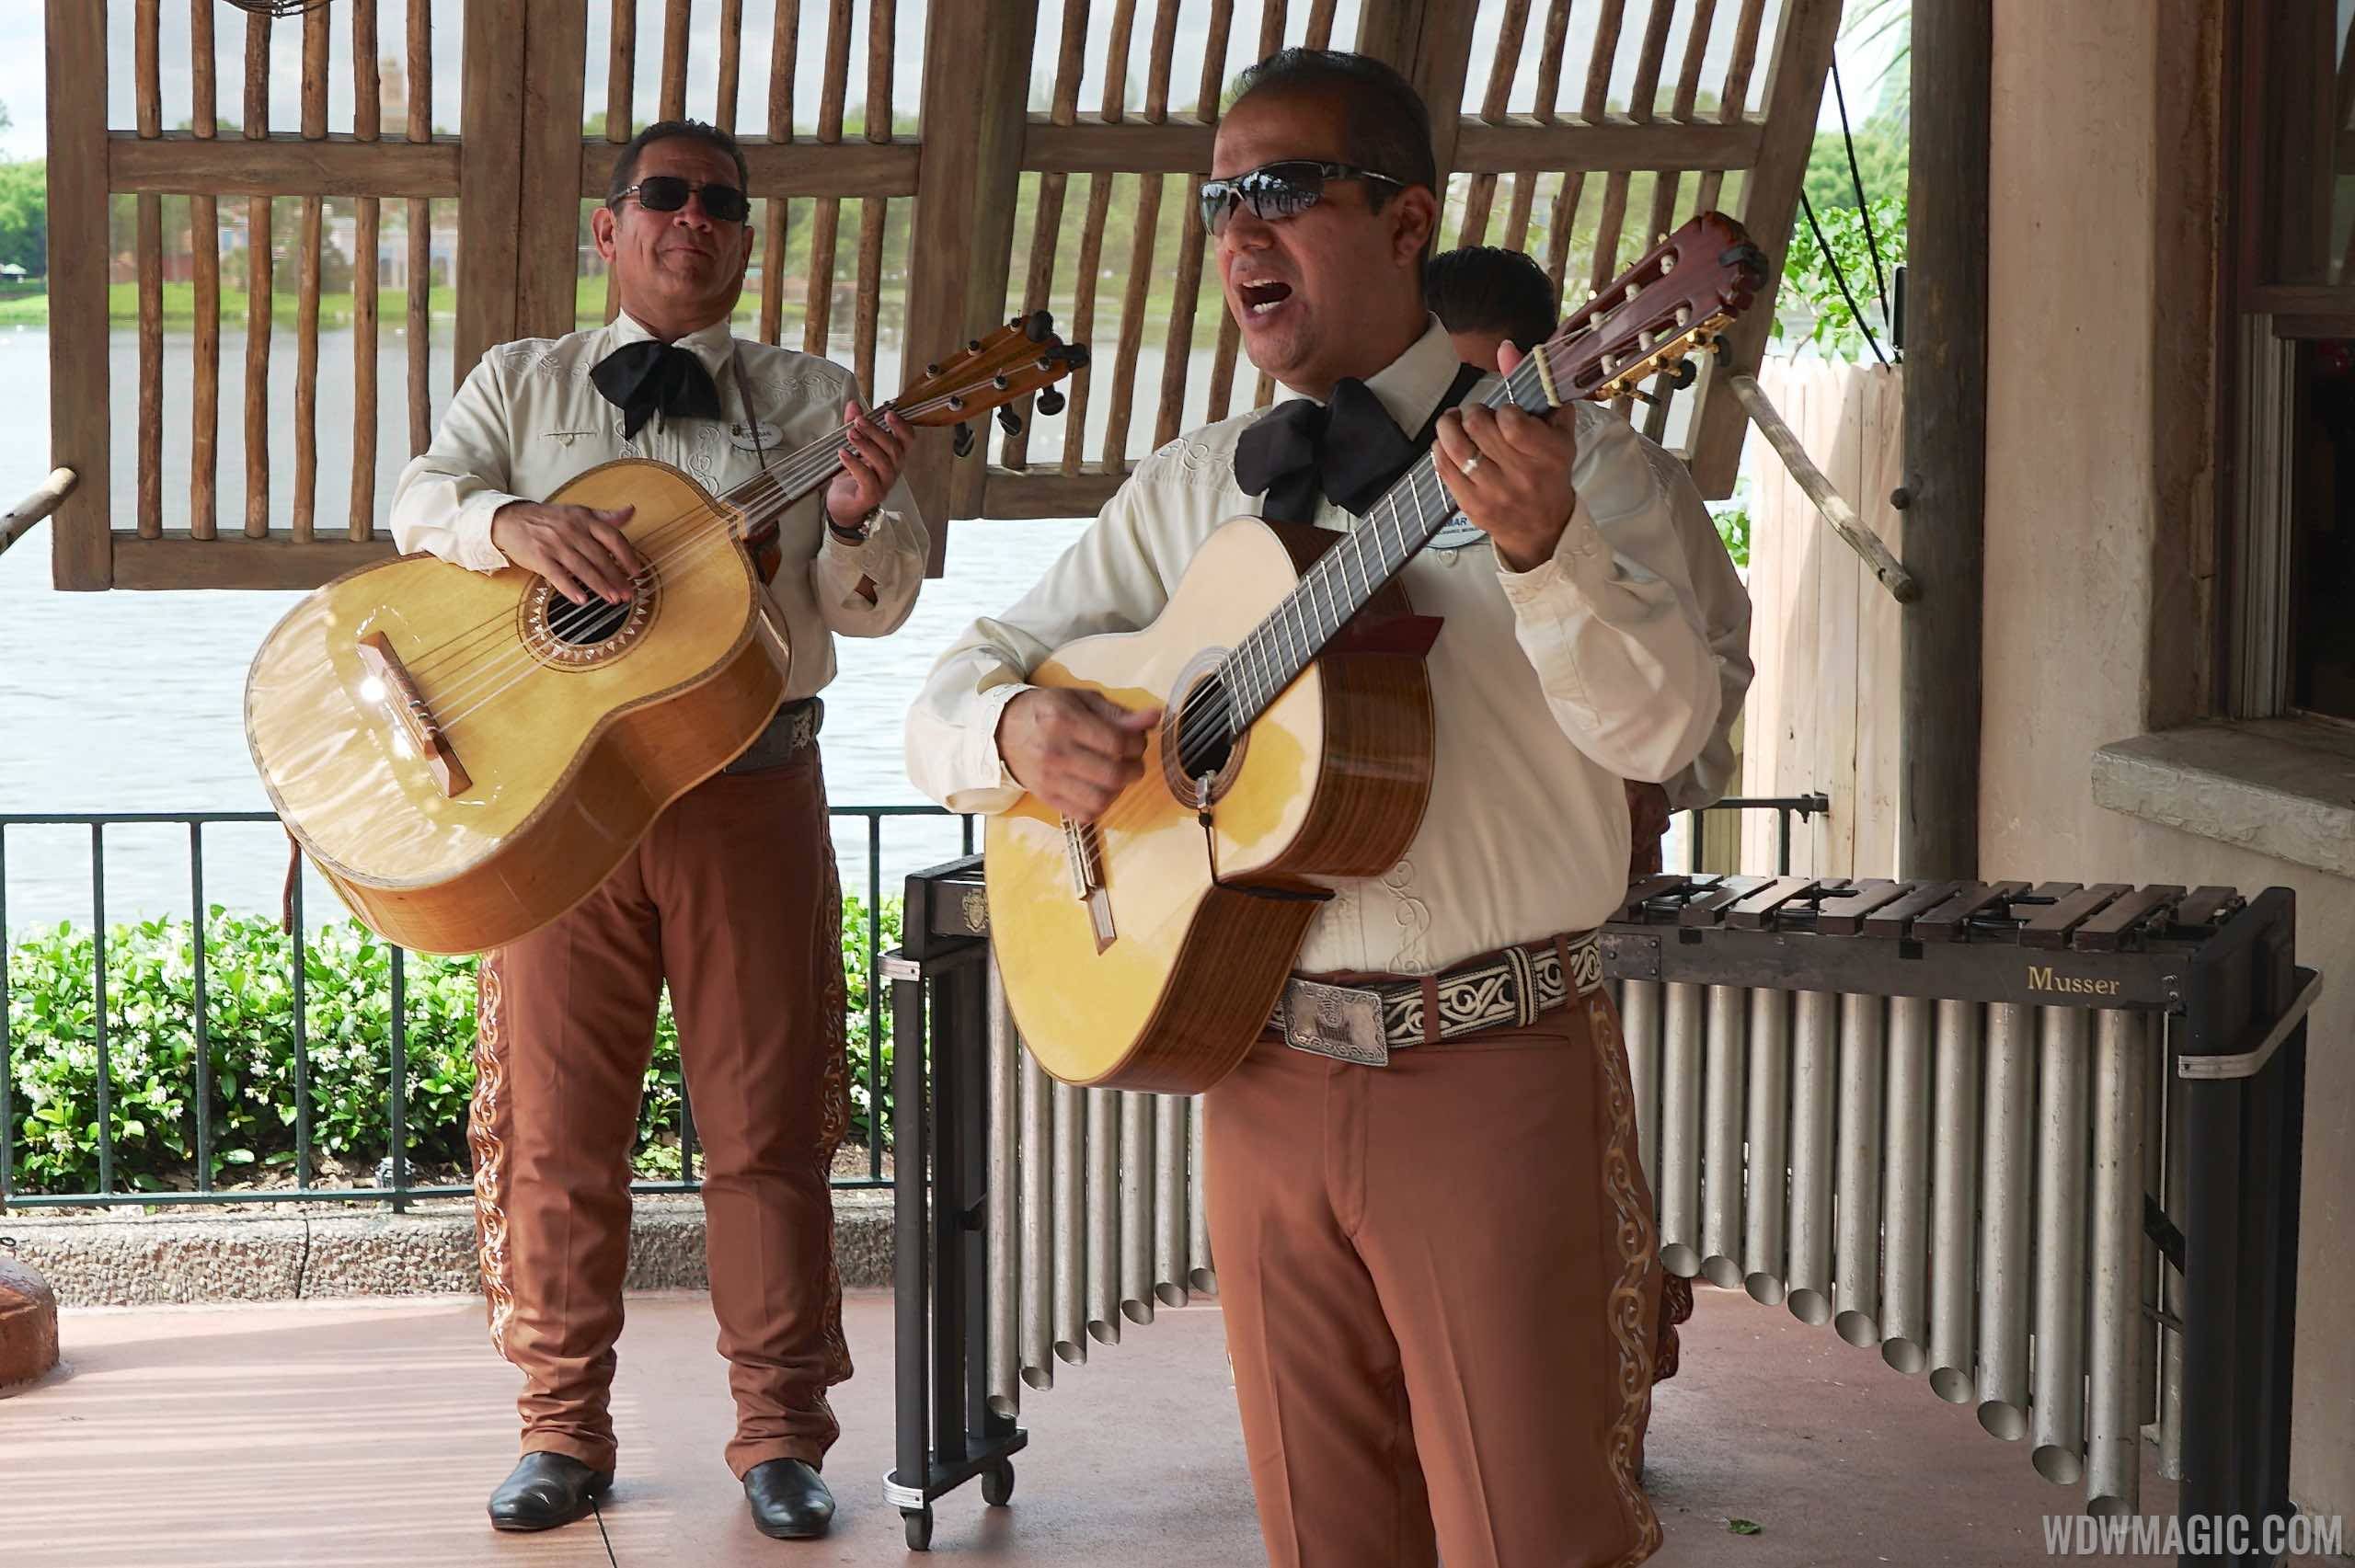 VIDEO - Mexican Marimba Trio now playing at Epcot's Mexico Pavilion